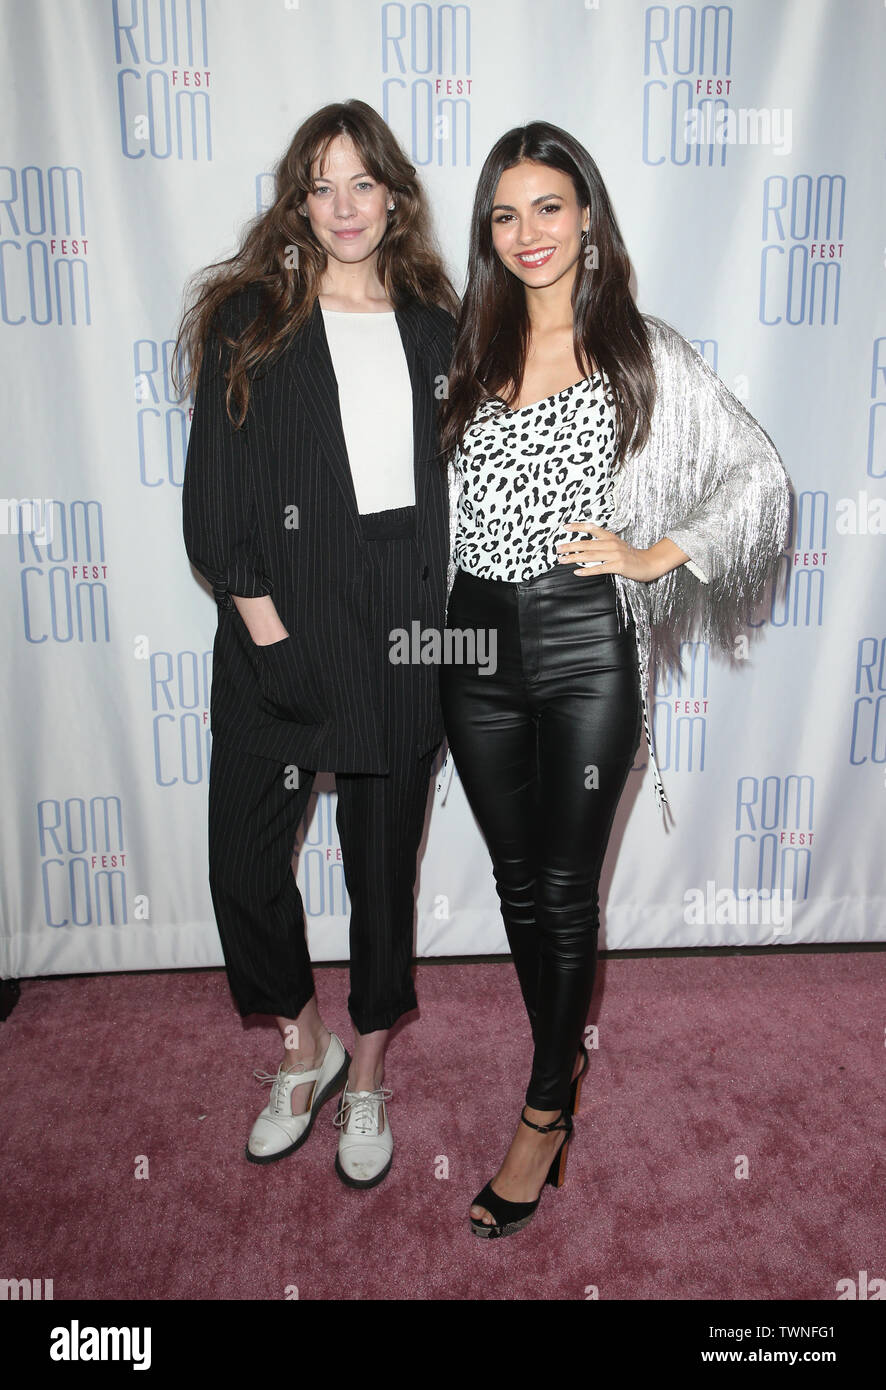 Los Angeles, Ca, USA. 21st June, 2019. Analeigh Tipton, Victoria Justice, at 2019 Rom Com Fest Los Angeles - 'Summer Night' at Downtown Independent in Los Angeles, California on June 21, 2019. Credit: Faye Sadou/Media Punch/Alamy Live News Stock Photo